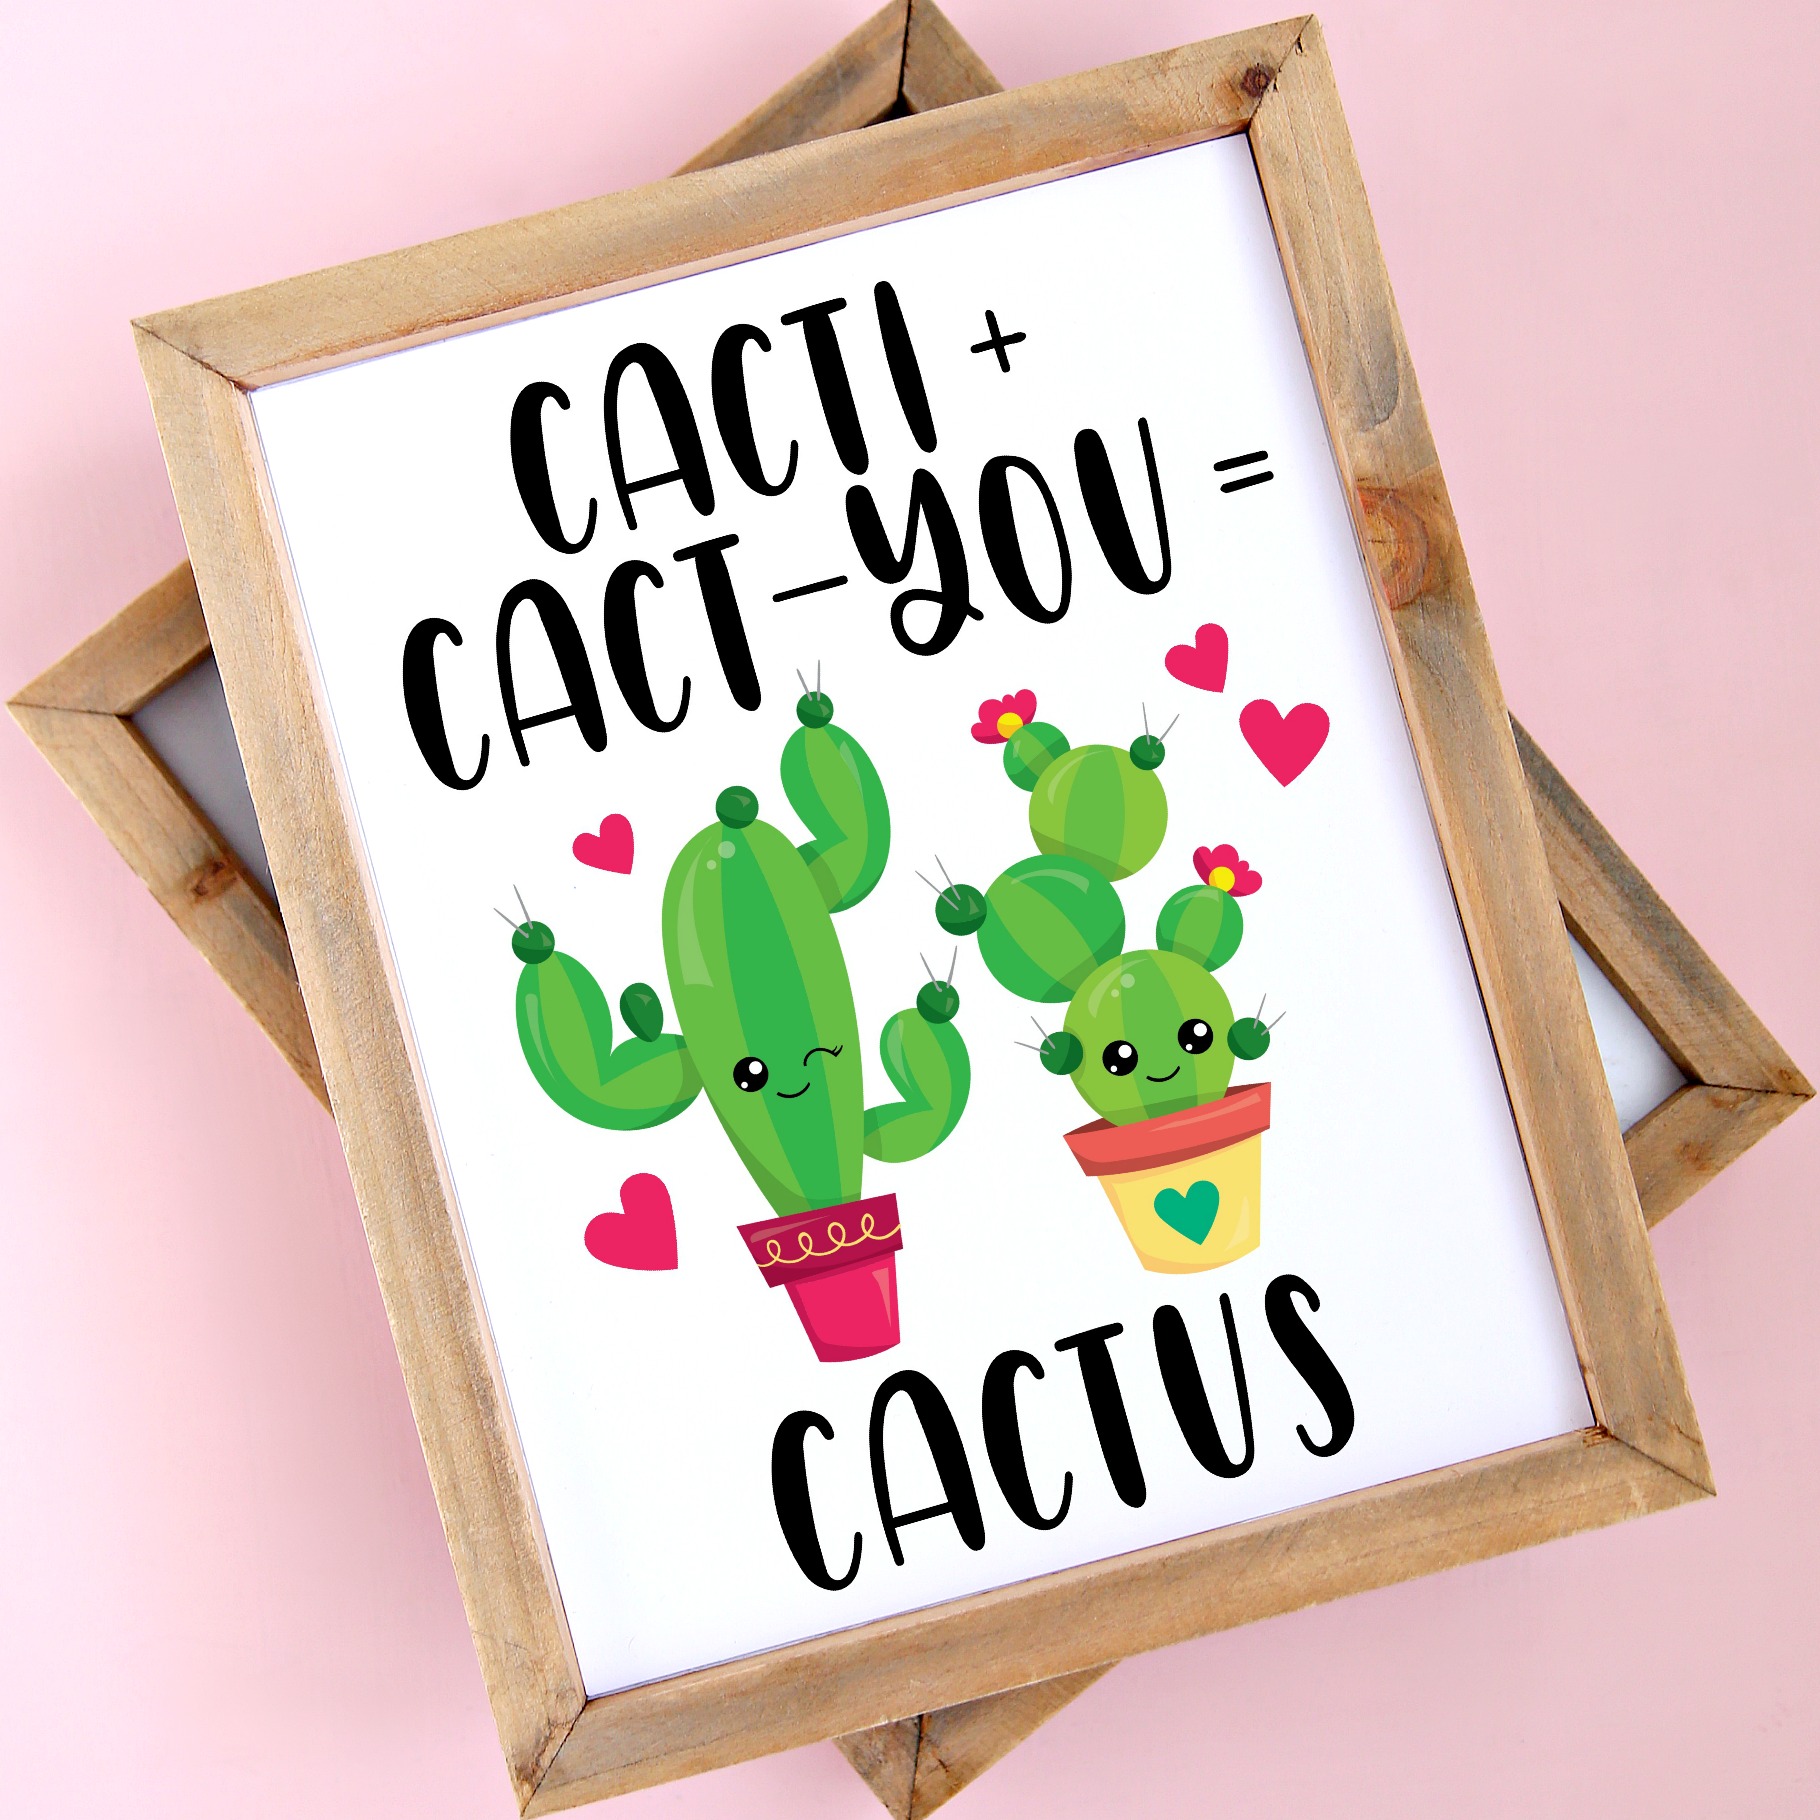 Cacti + Cact-you = Cactus Free Printable in wood frame